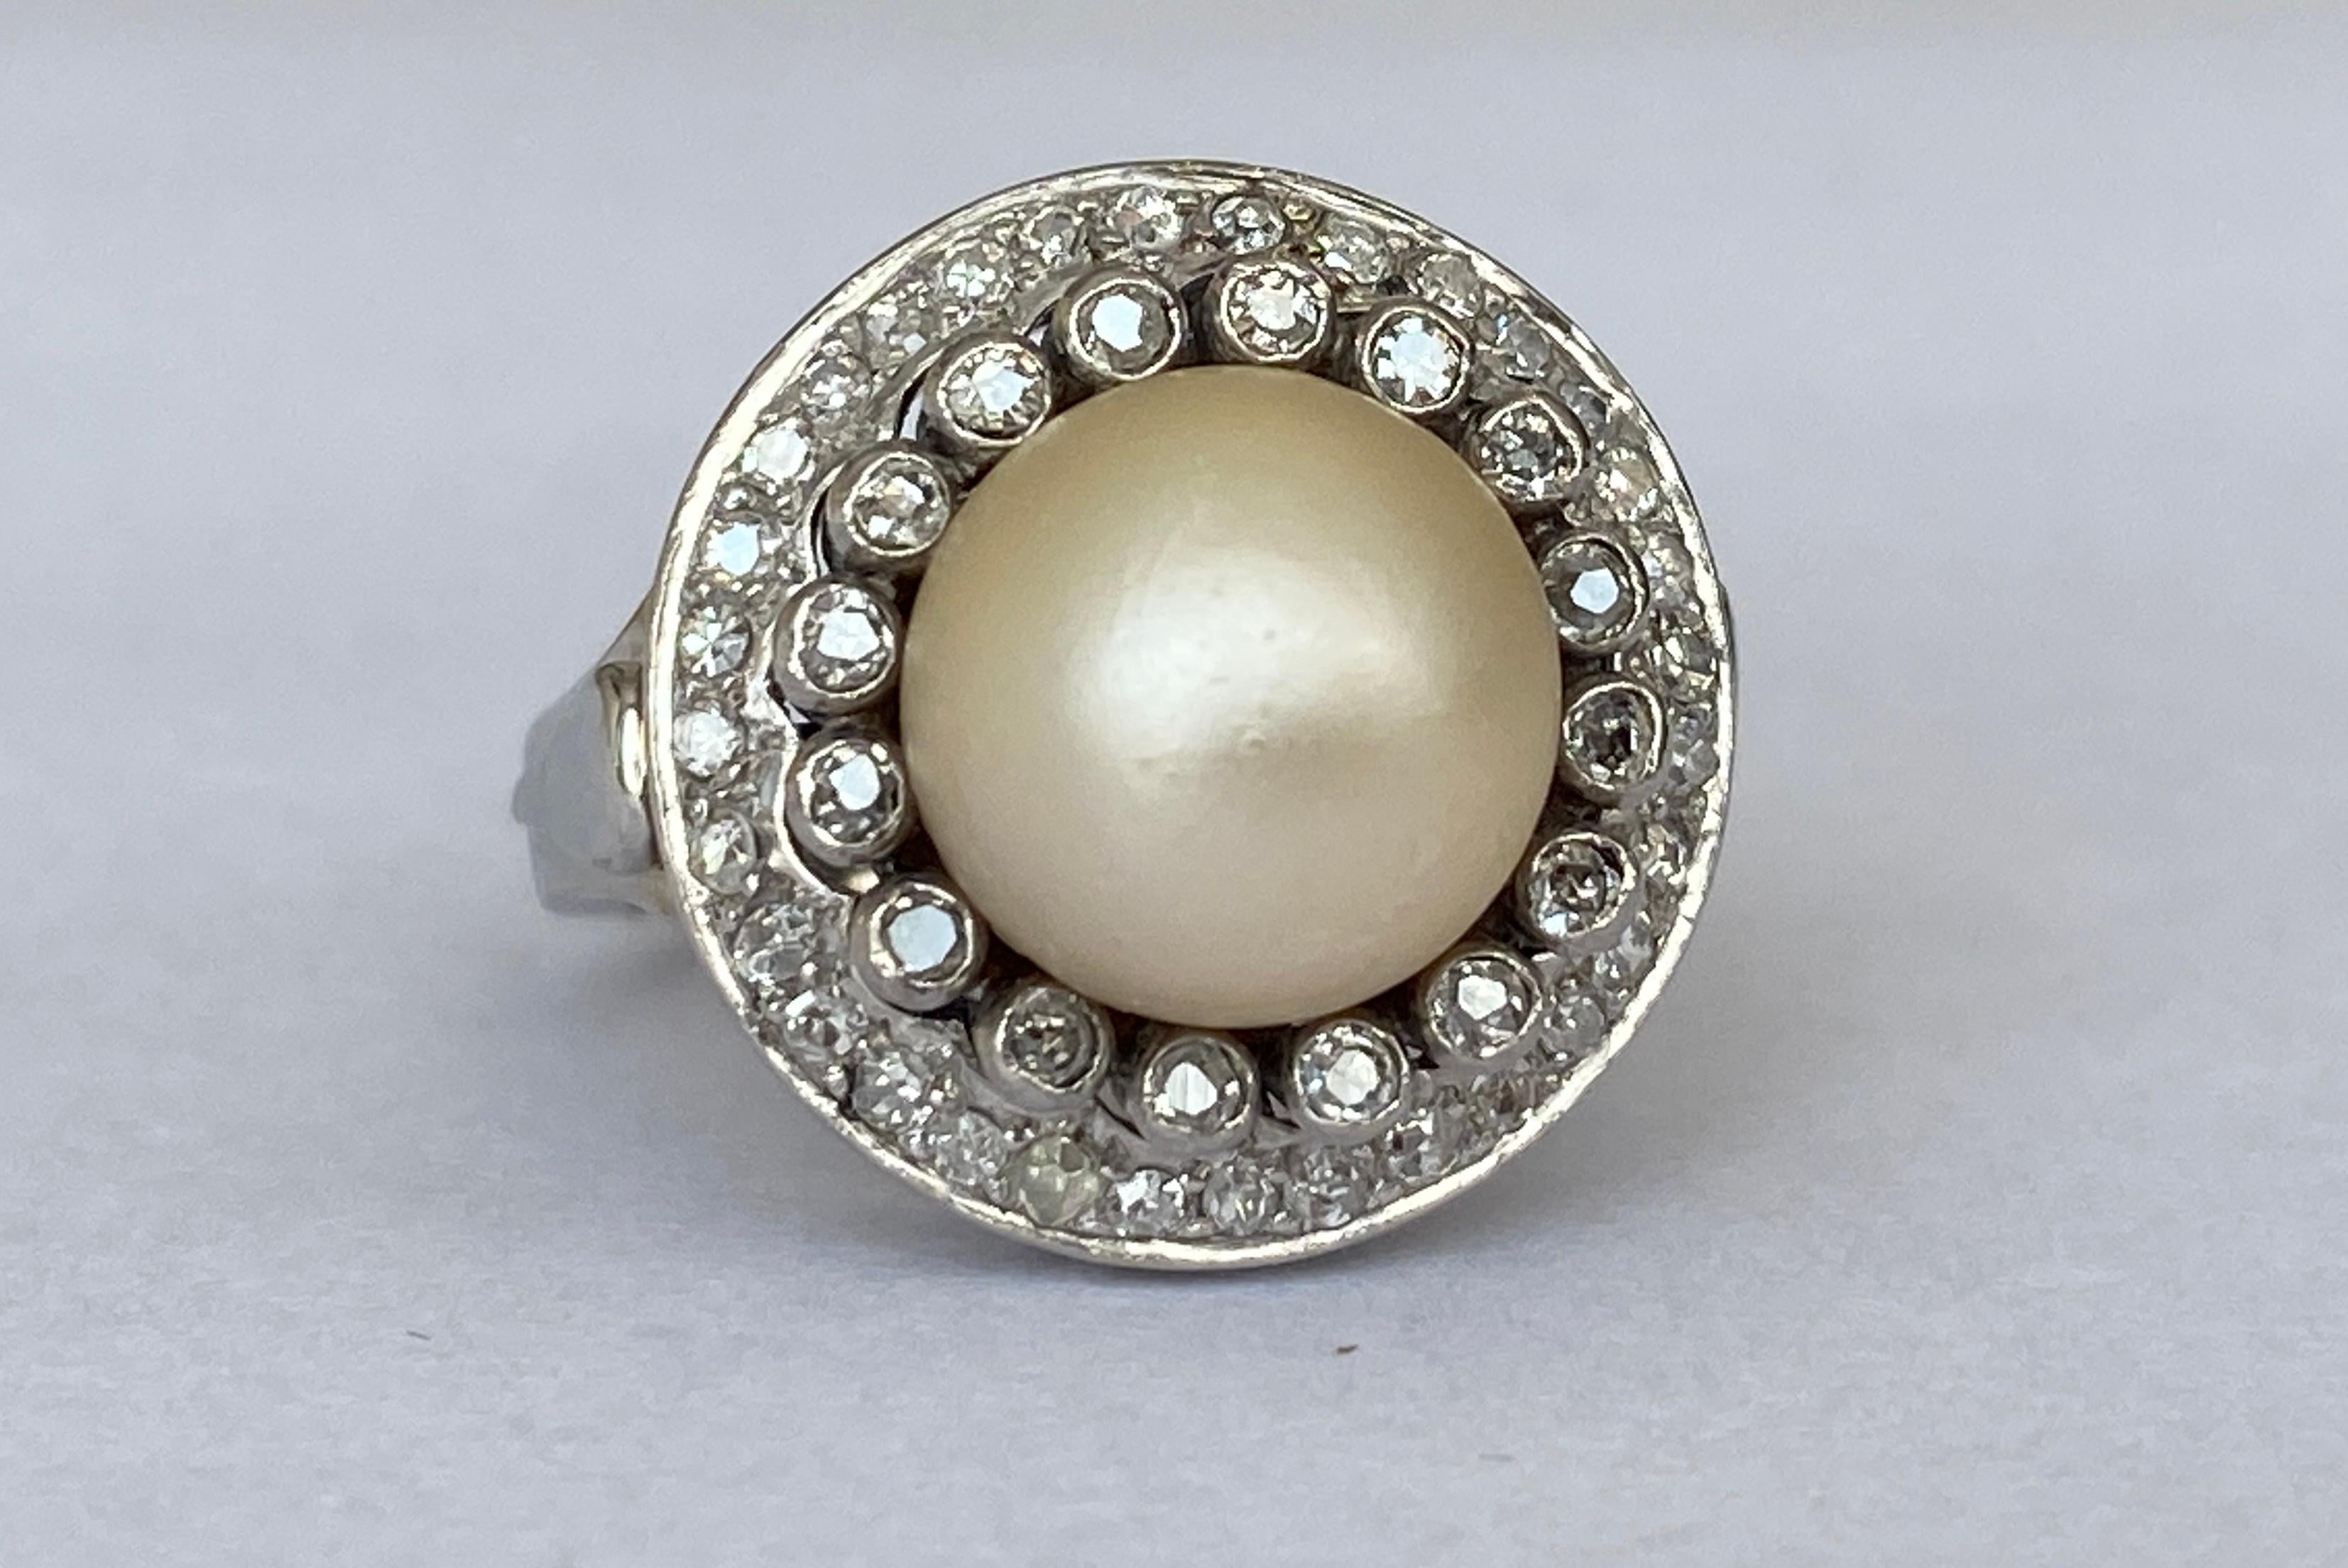 On offer is a white gold Later Art Deco Platinum Cocktail ring decorated with a 1 Akoya Pearl of approx. 9.73 mm and surrounded in two rows with 47 octagonal cut diamonds of approx. 0.55 ct in total of quality I/SI/P1.
Gold content: Platinum